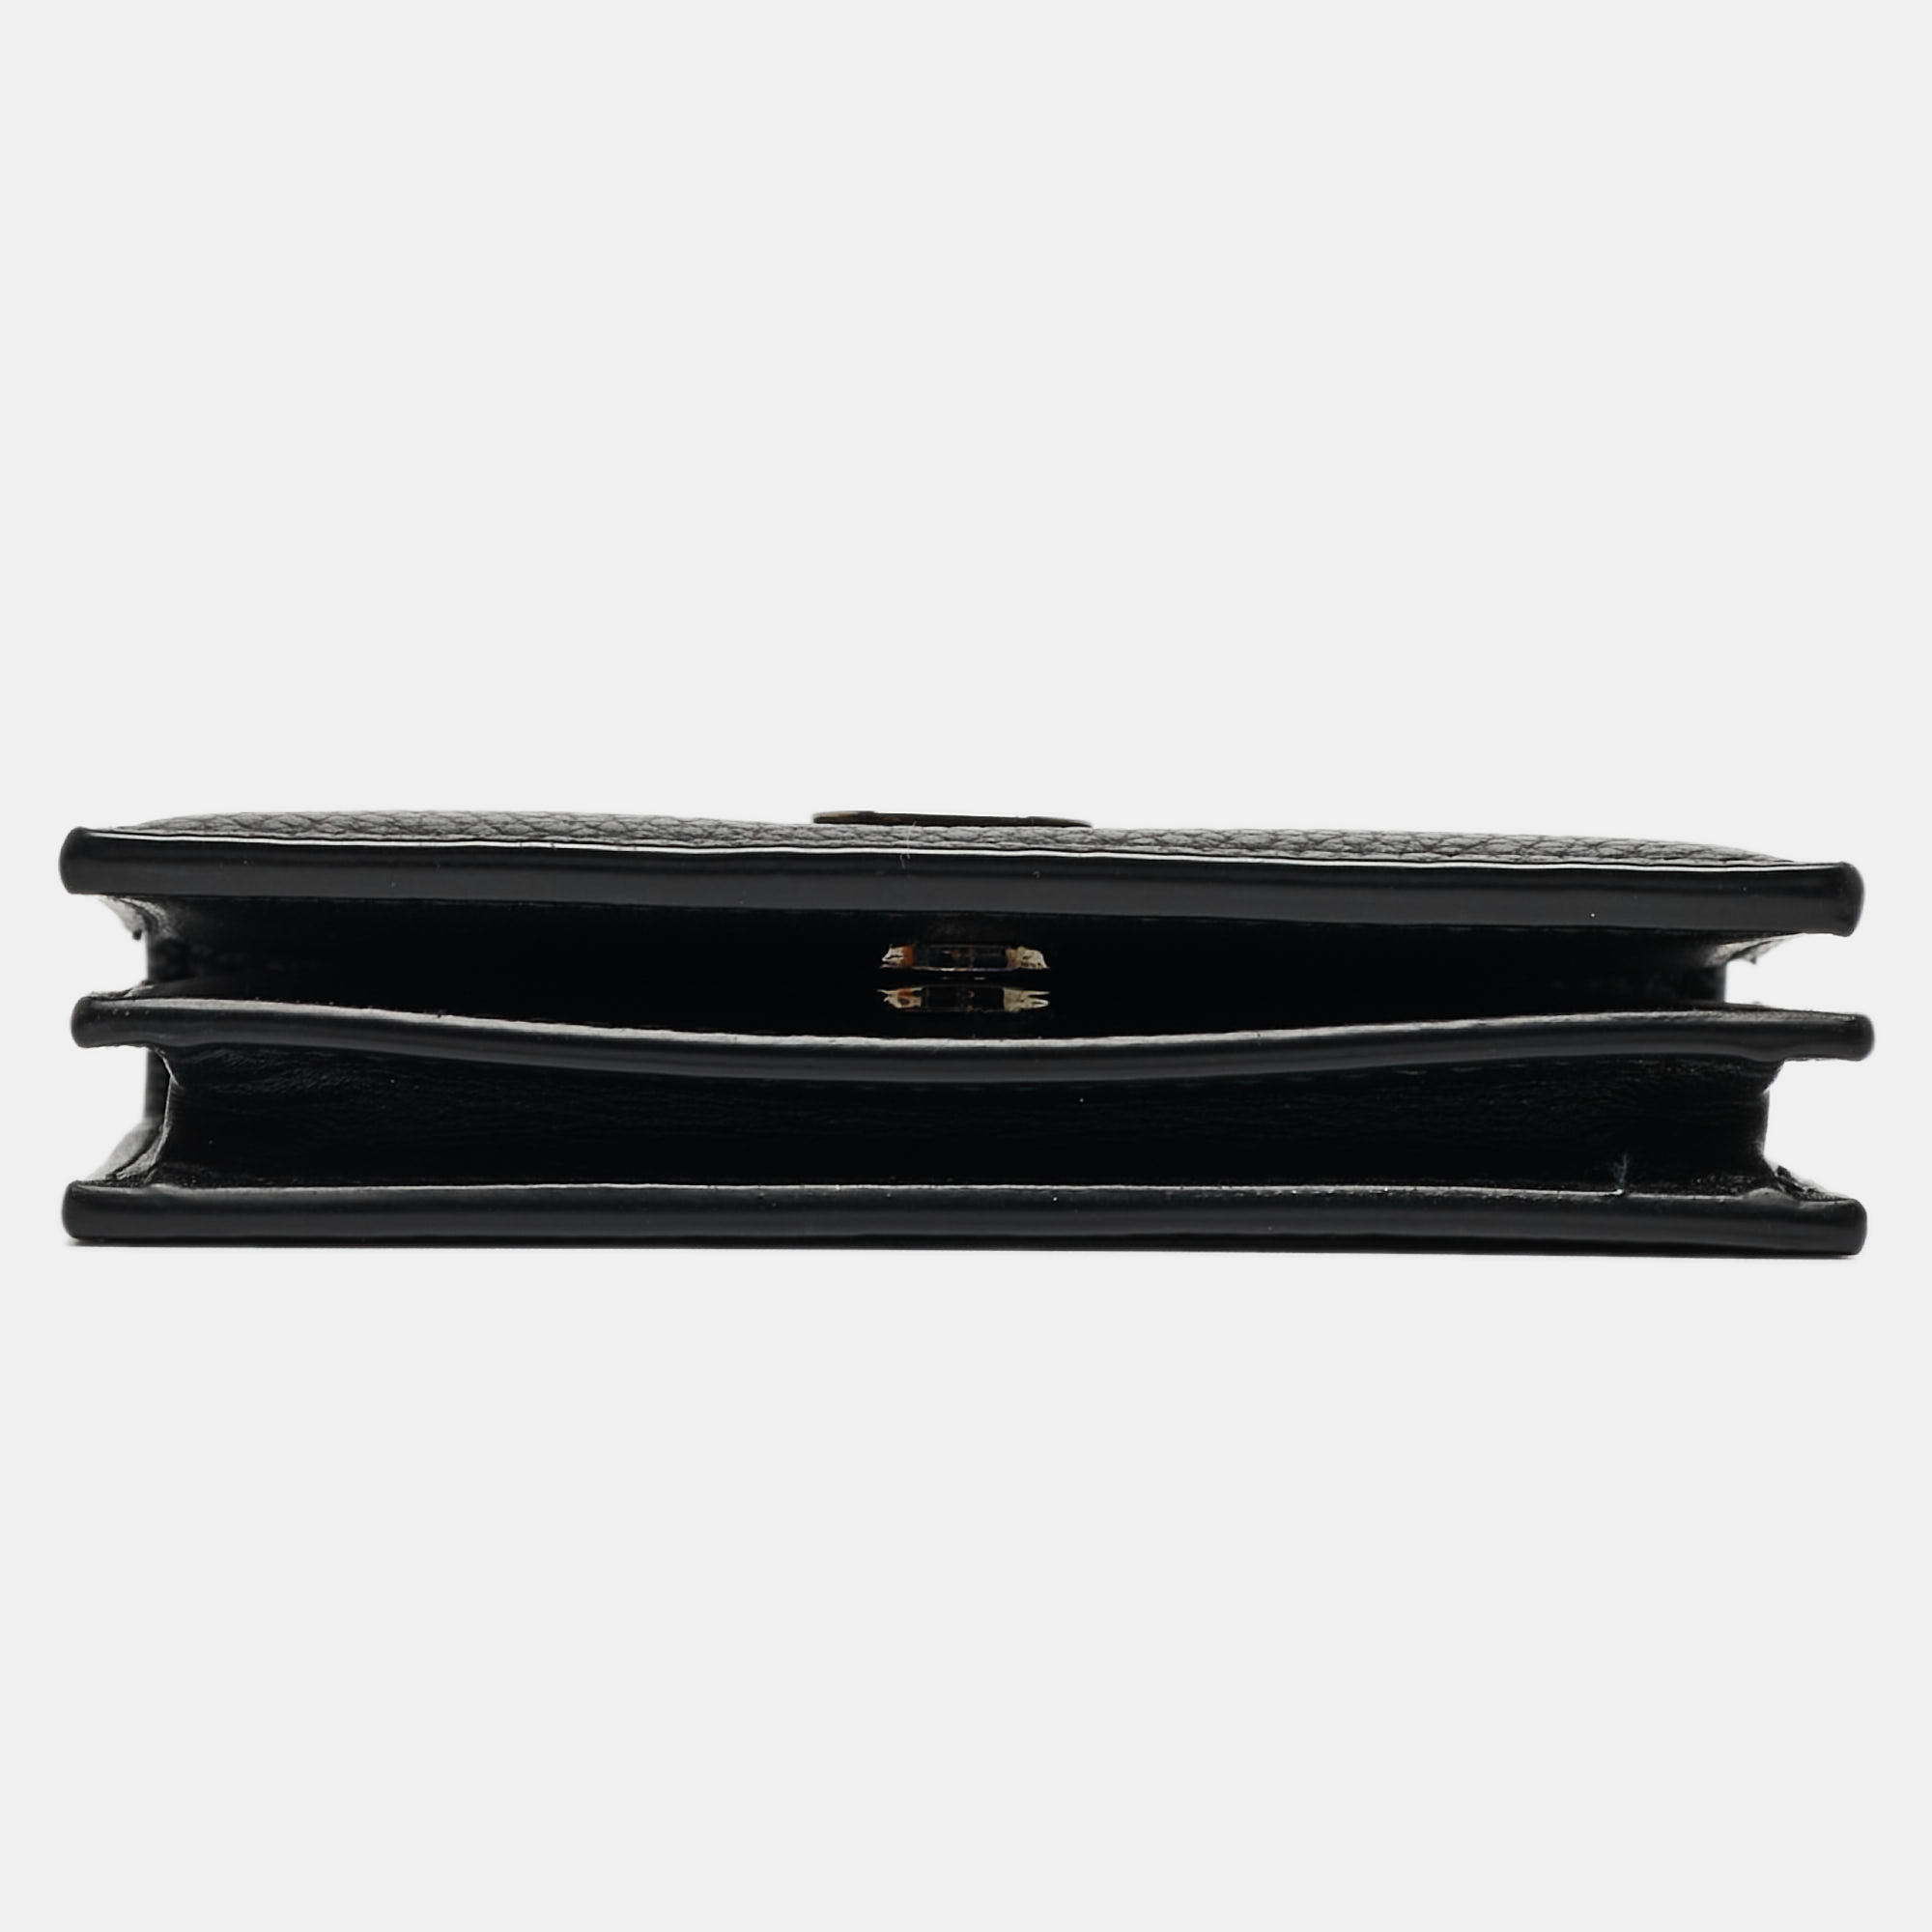 Dior Black Grained Leather Bifold Card Holder